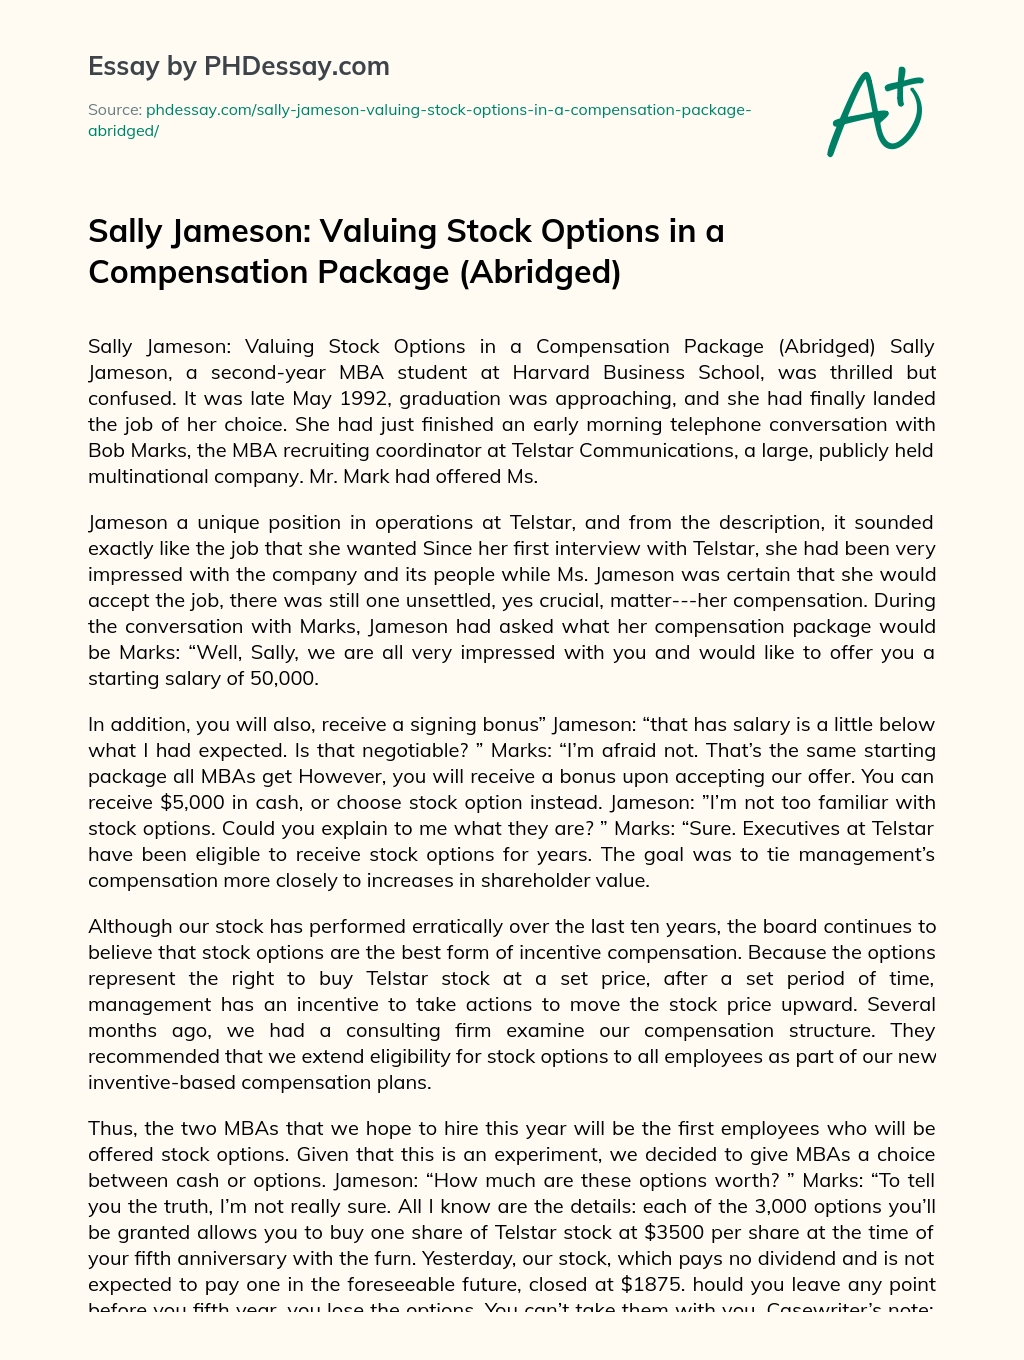 Sally Jameson: Valuing Stock Options in a Compensation Package (Abridged) essay